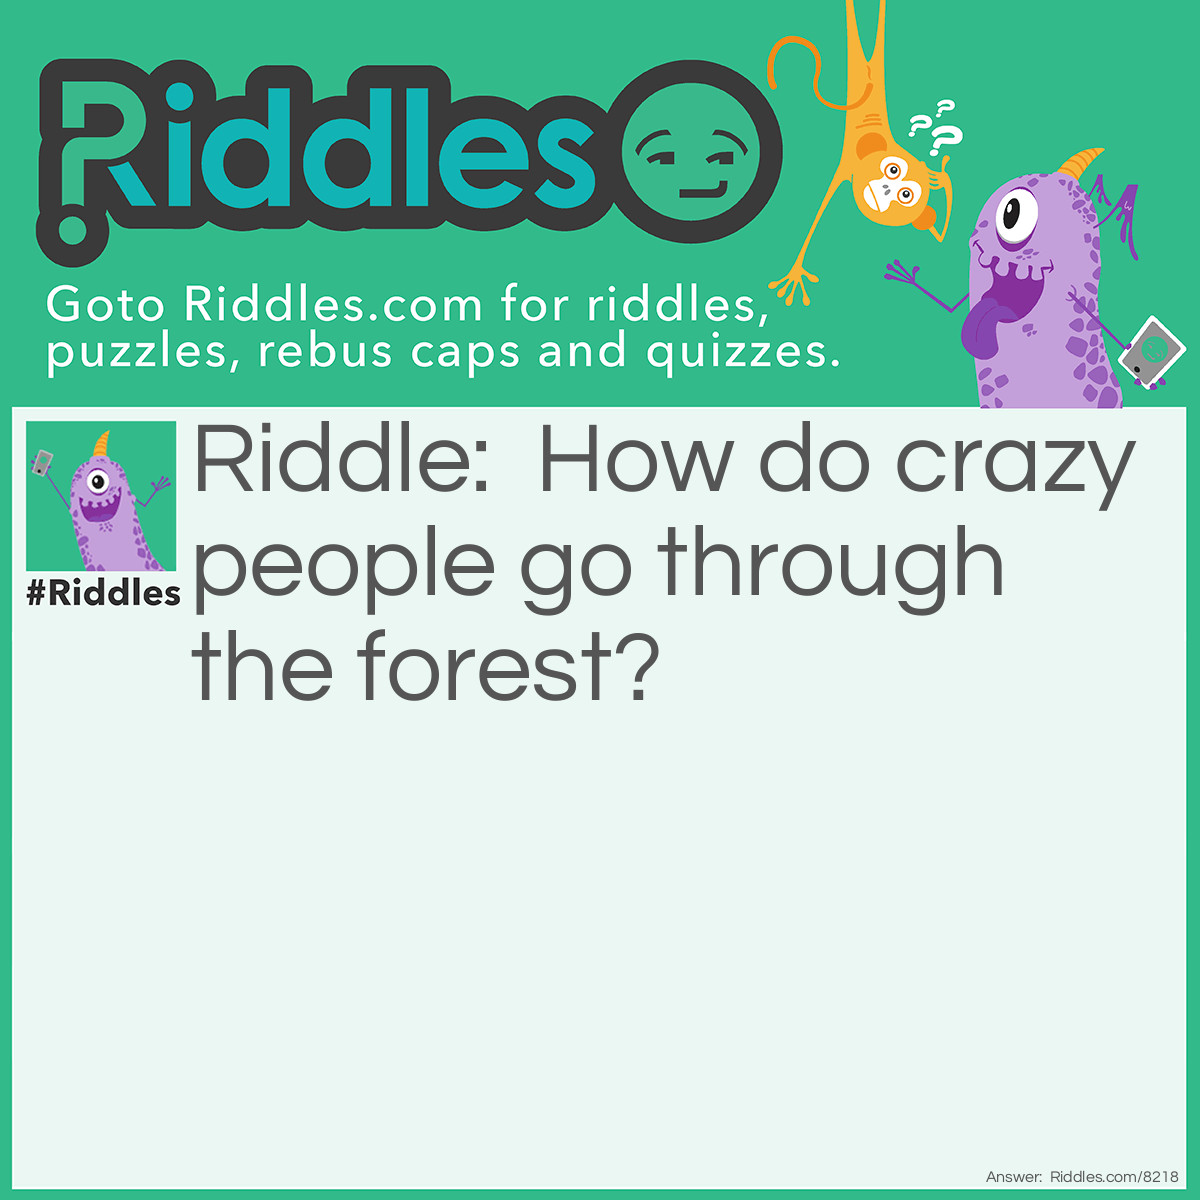 Riddle: How do crazy people go through the forest? Answer: They take the psycho path.